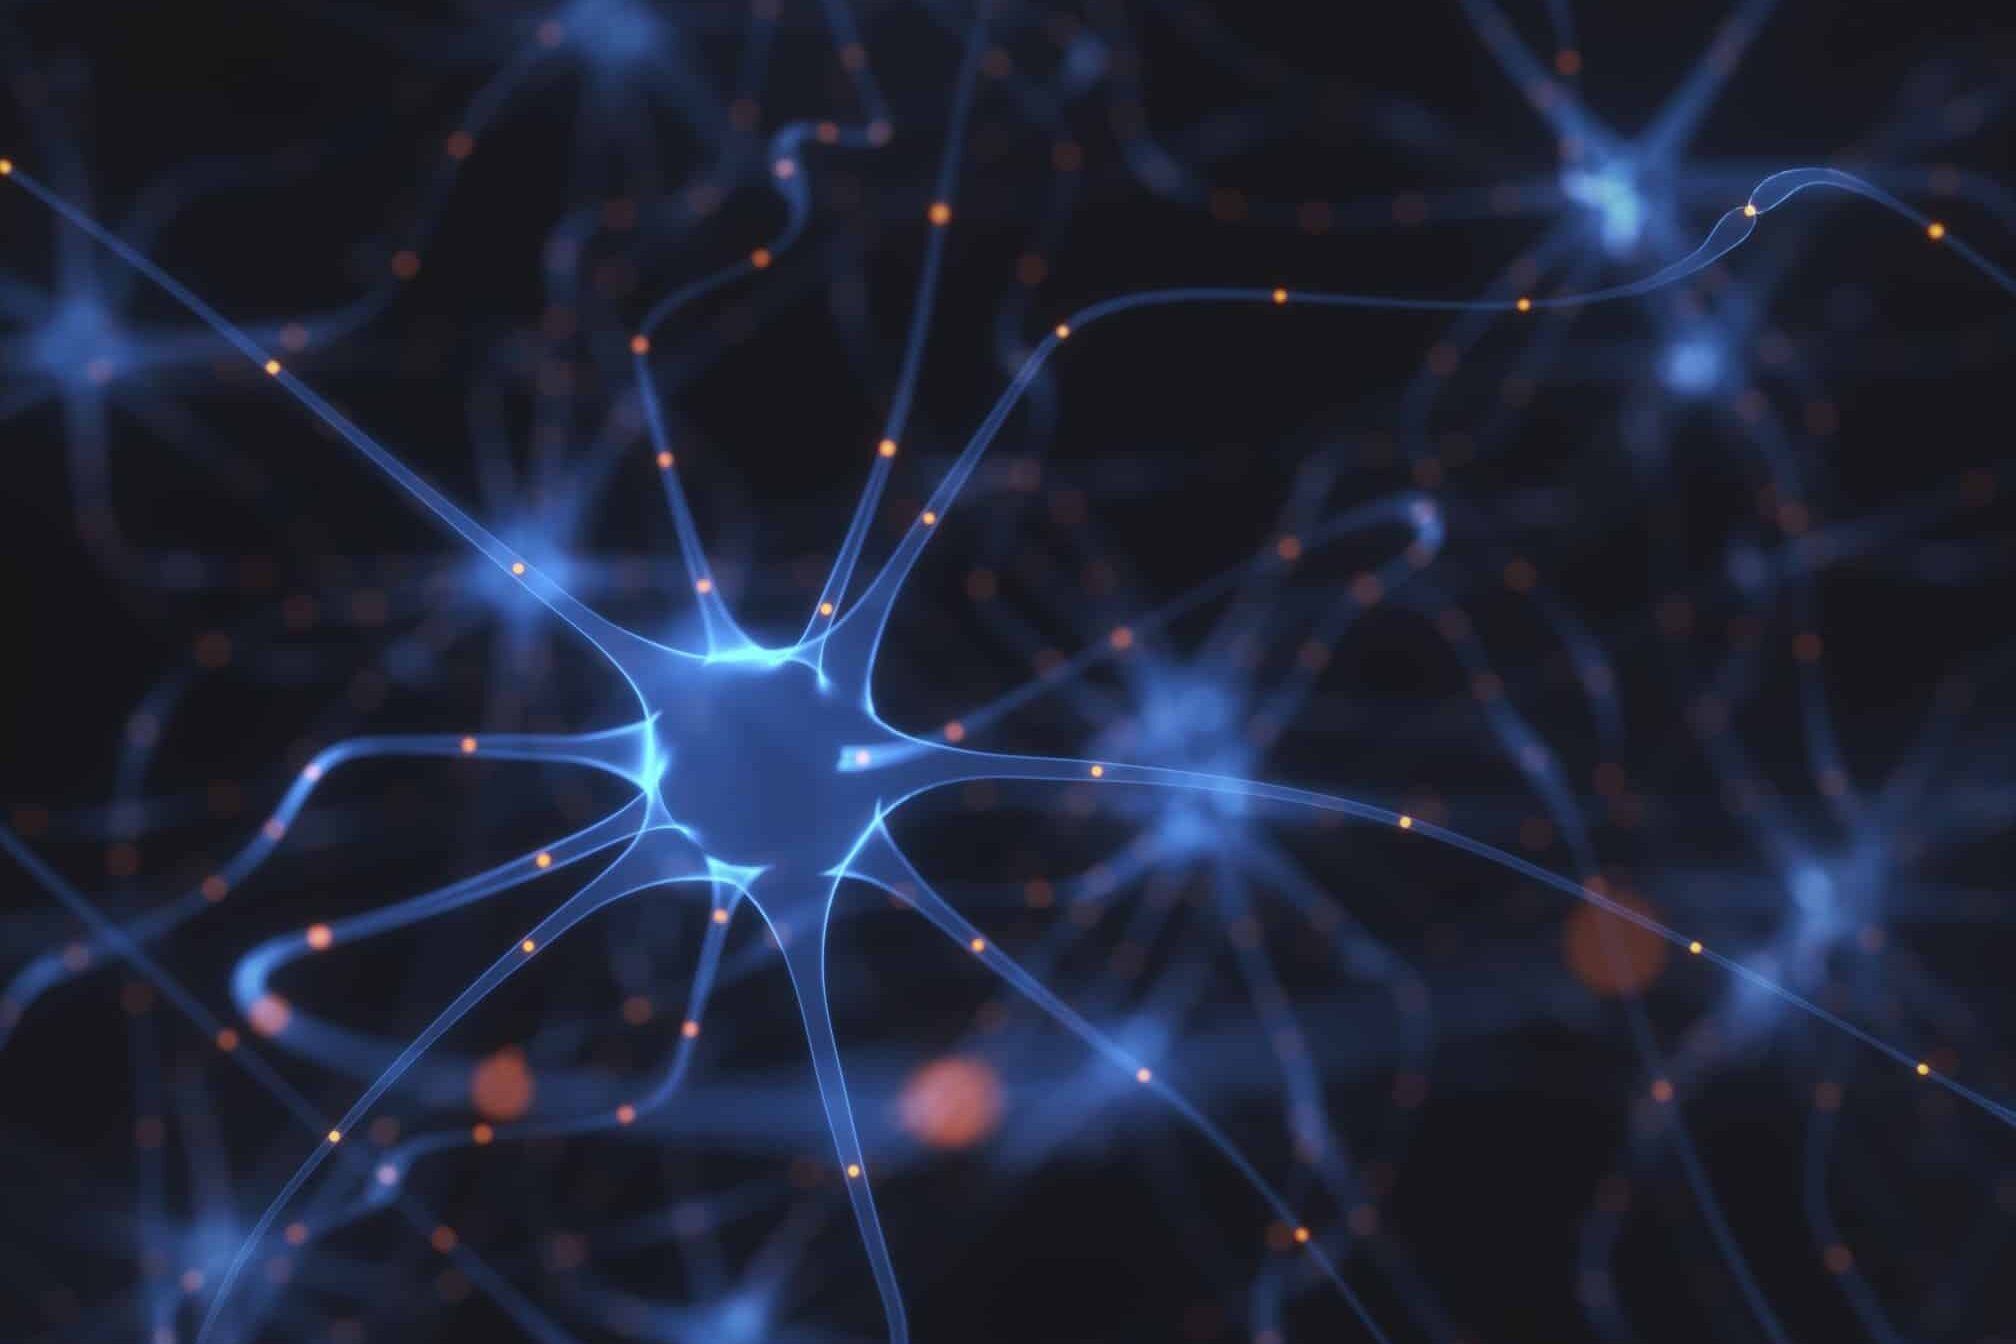 Image of a neuron, inspiration for research on quantum materials